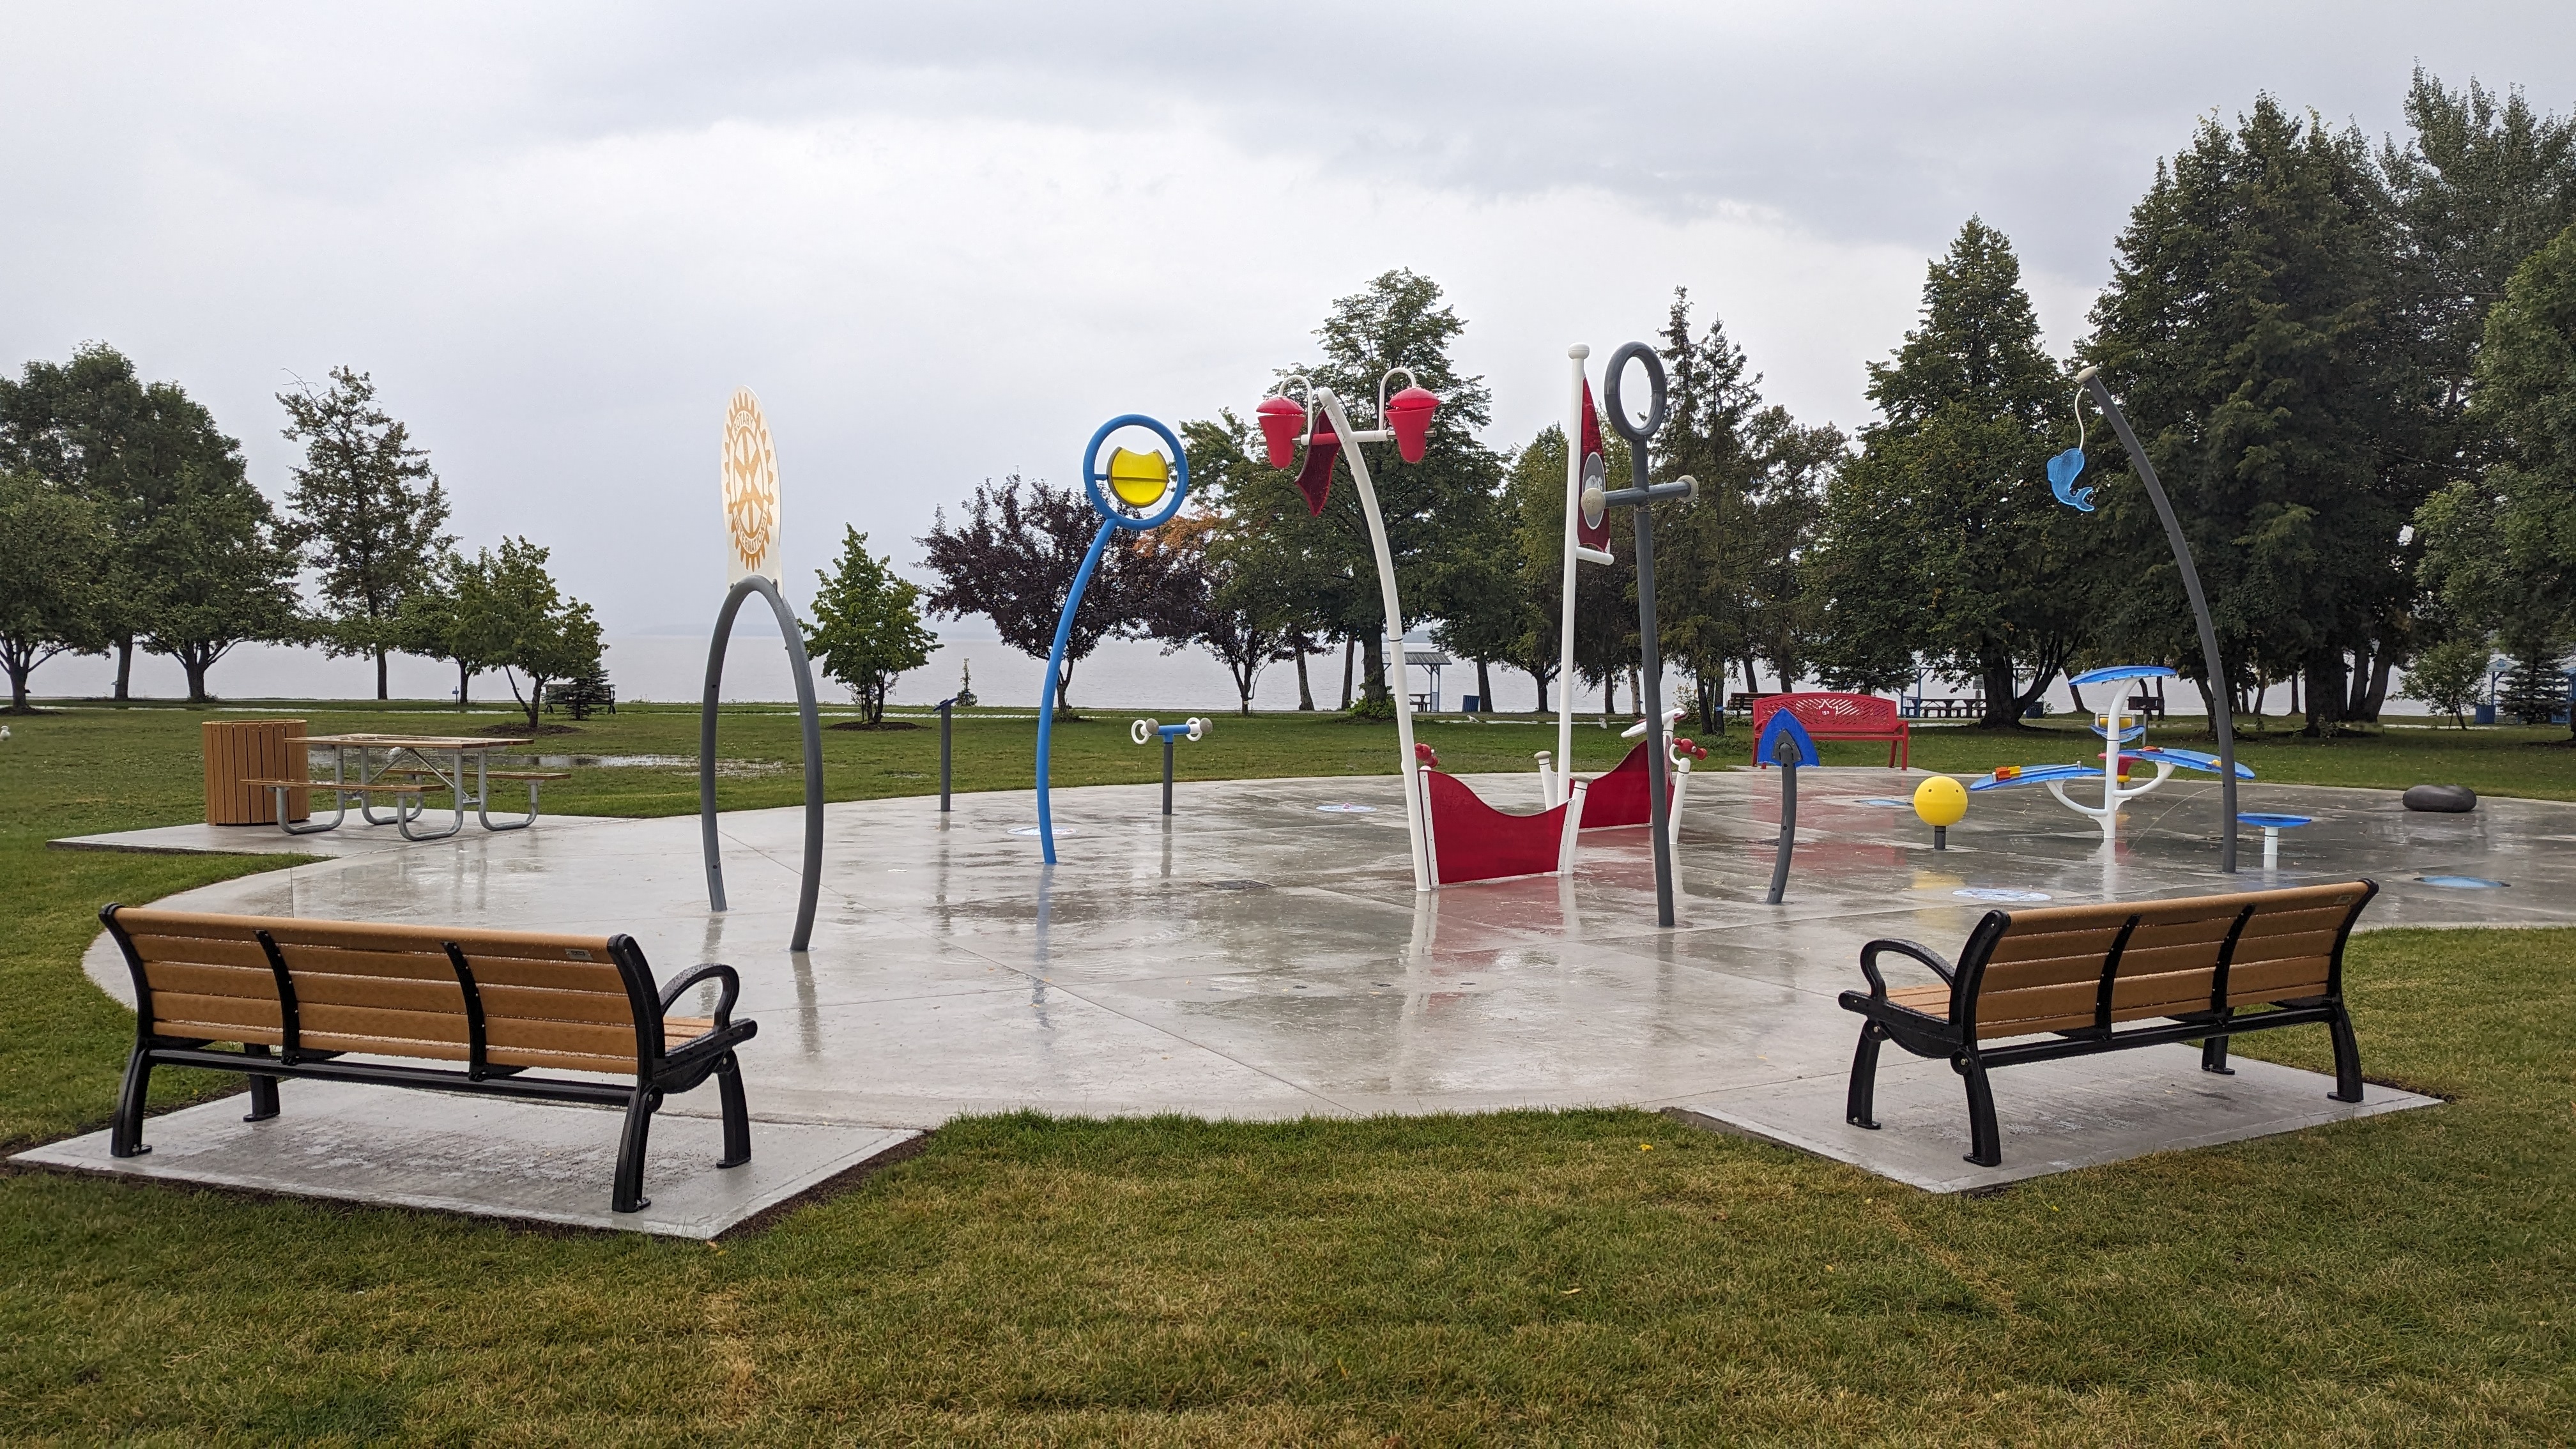 Image of a splash pad with benches in the foreground